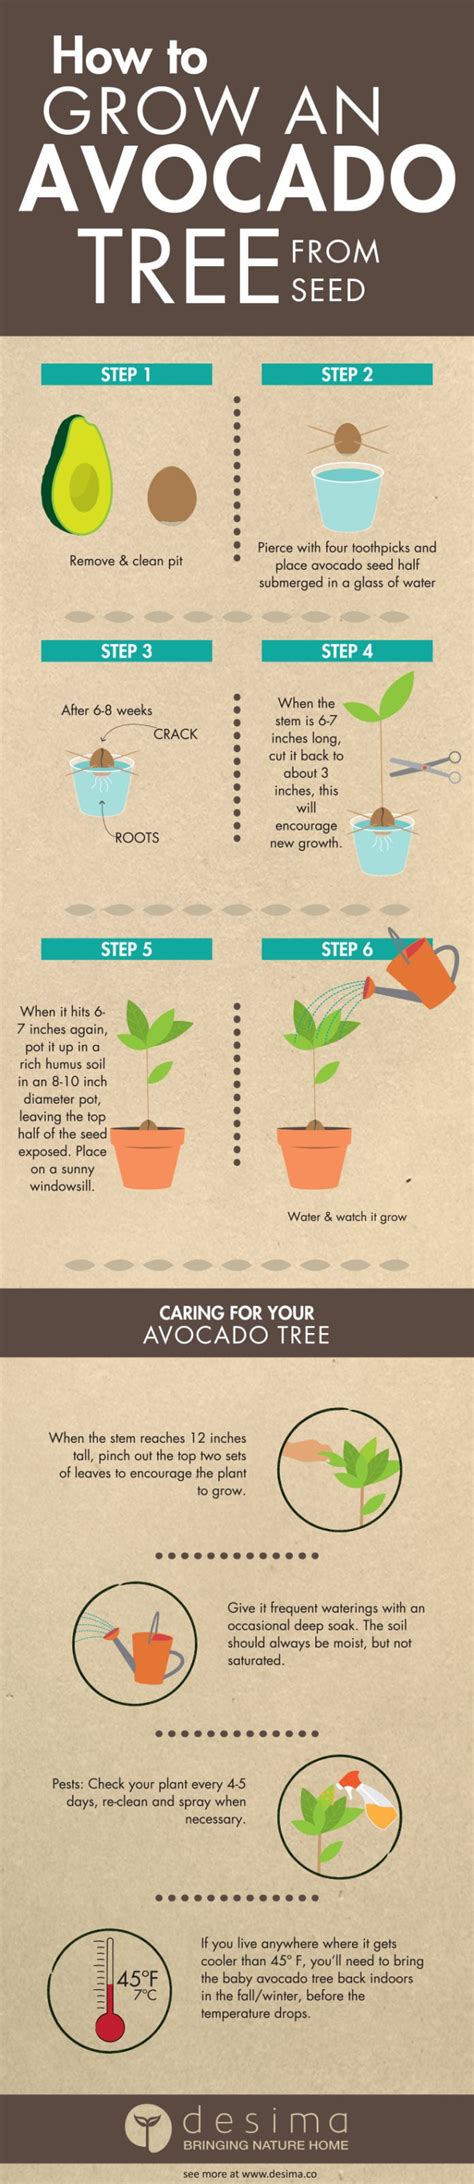 How To Grow An Avocado Tree From Seed [infographic] Greener Ideal